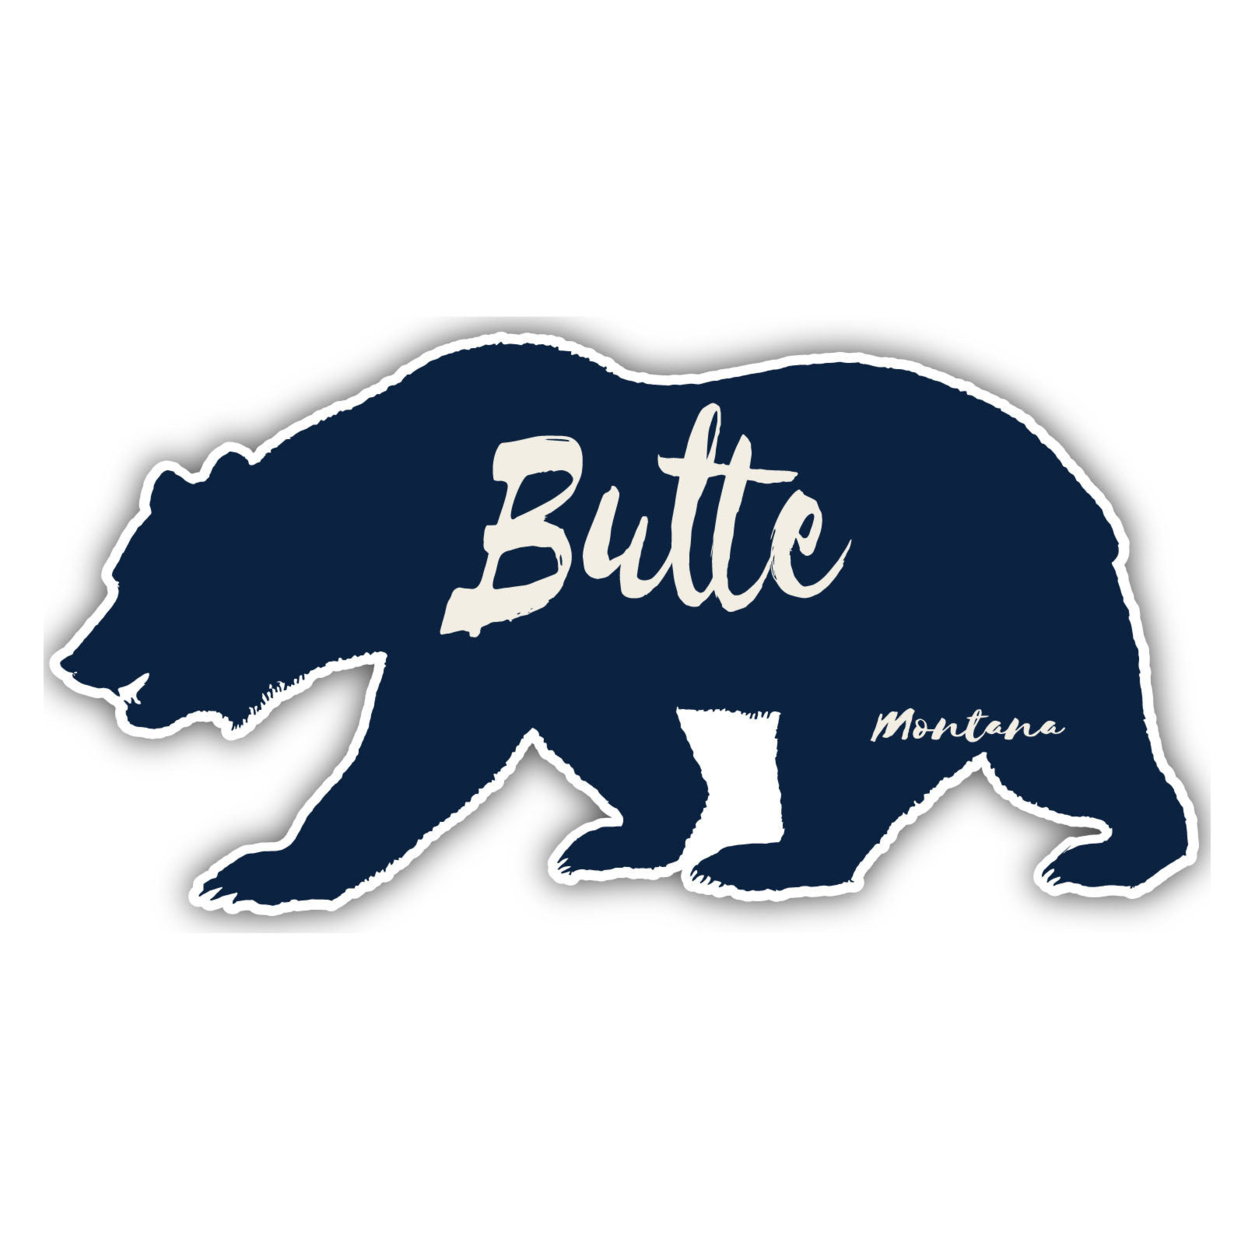 Butte Montana Souvenir Decorative Stickers (Choose Theme And Size) - 4-Pack, 10-Inch, Tent